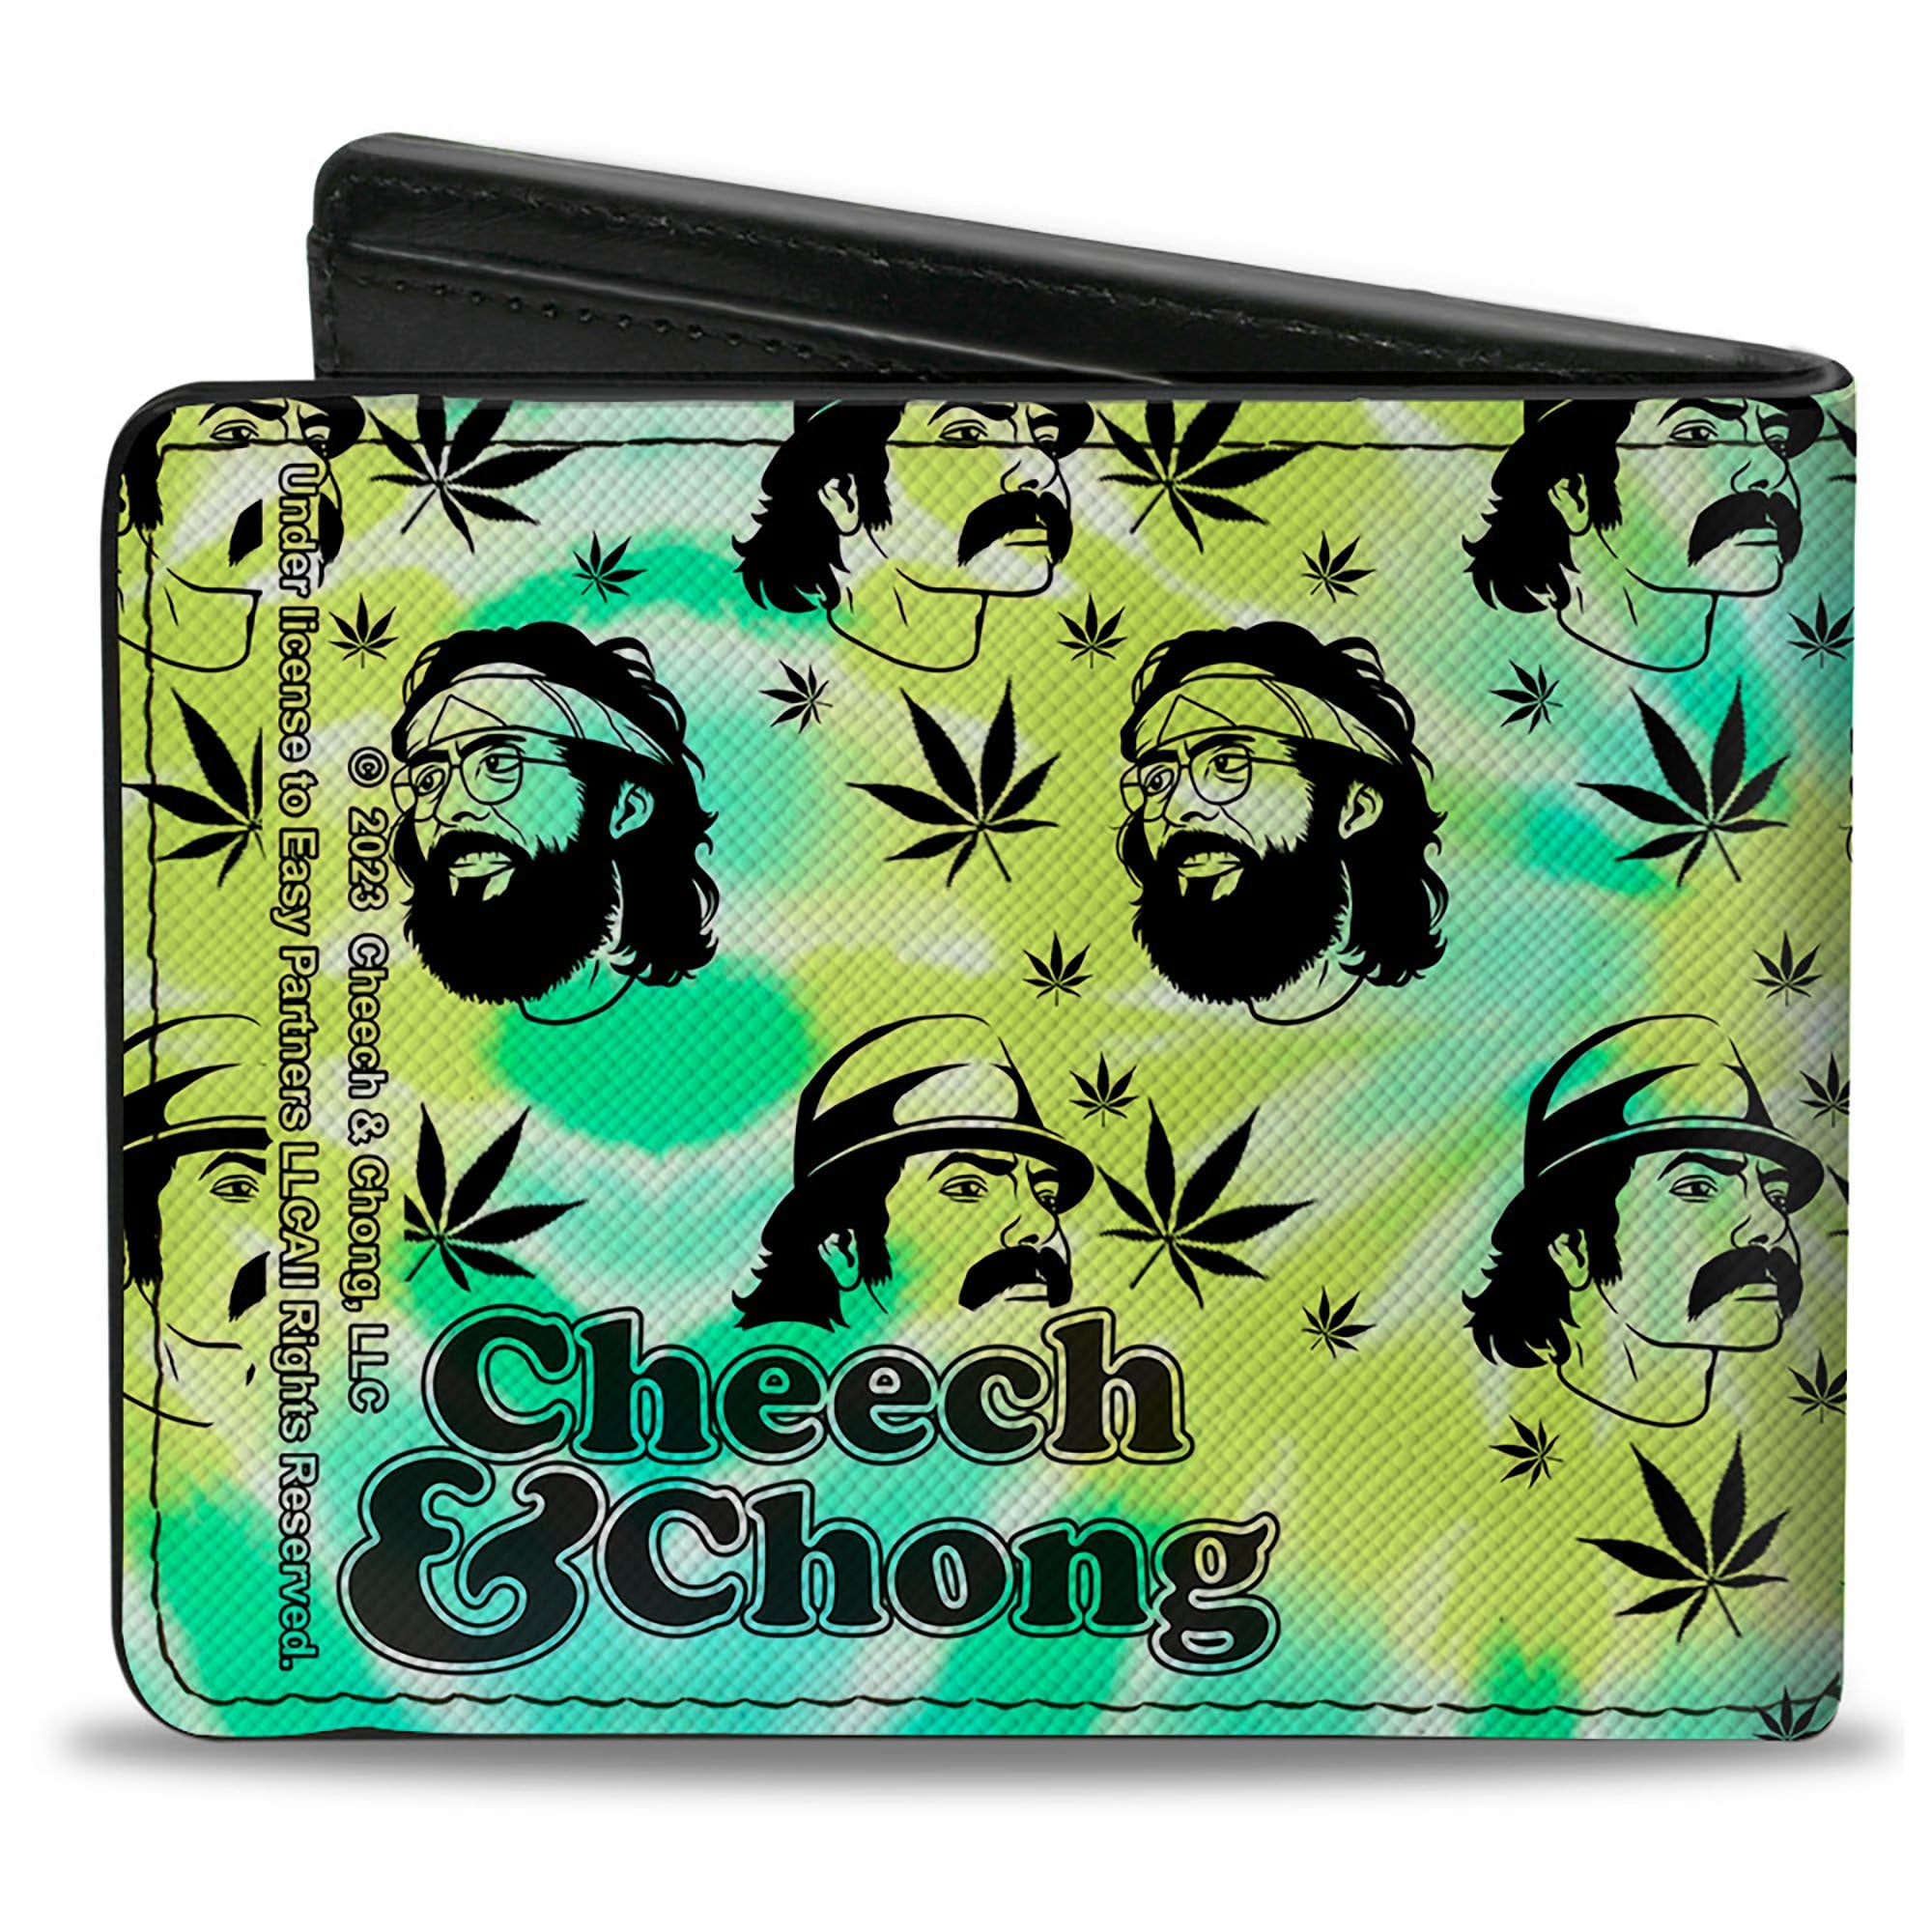 Bi-Fold Wallet - CHEECH & CHONG Caricature Faces/Pot Leaves Scattered Tie Dye Greens/Black